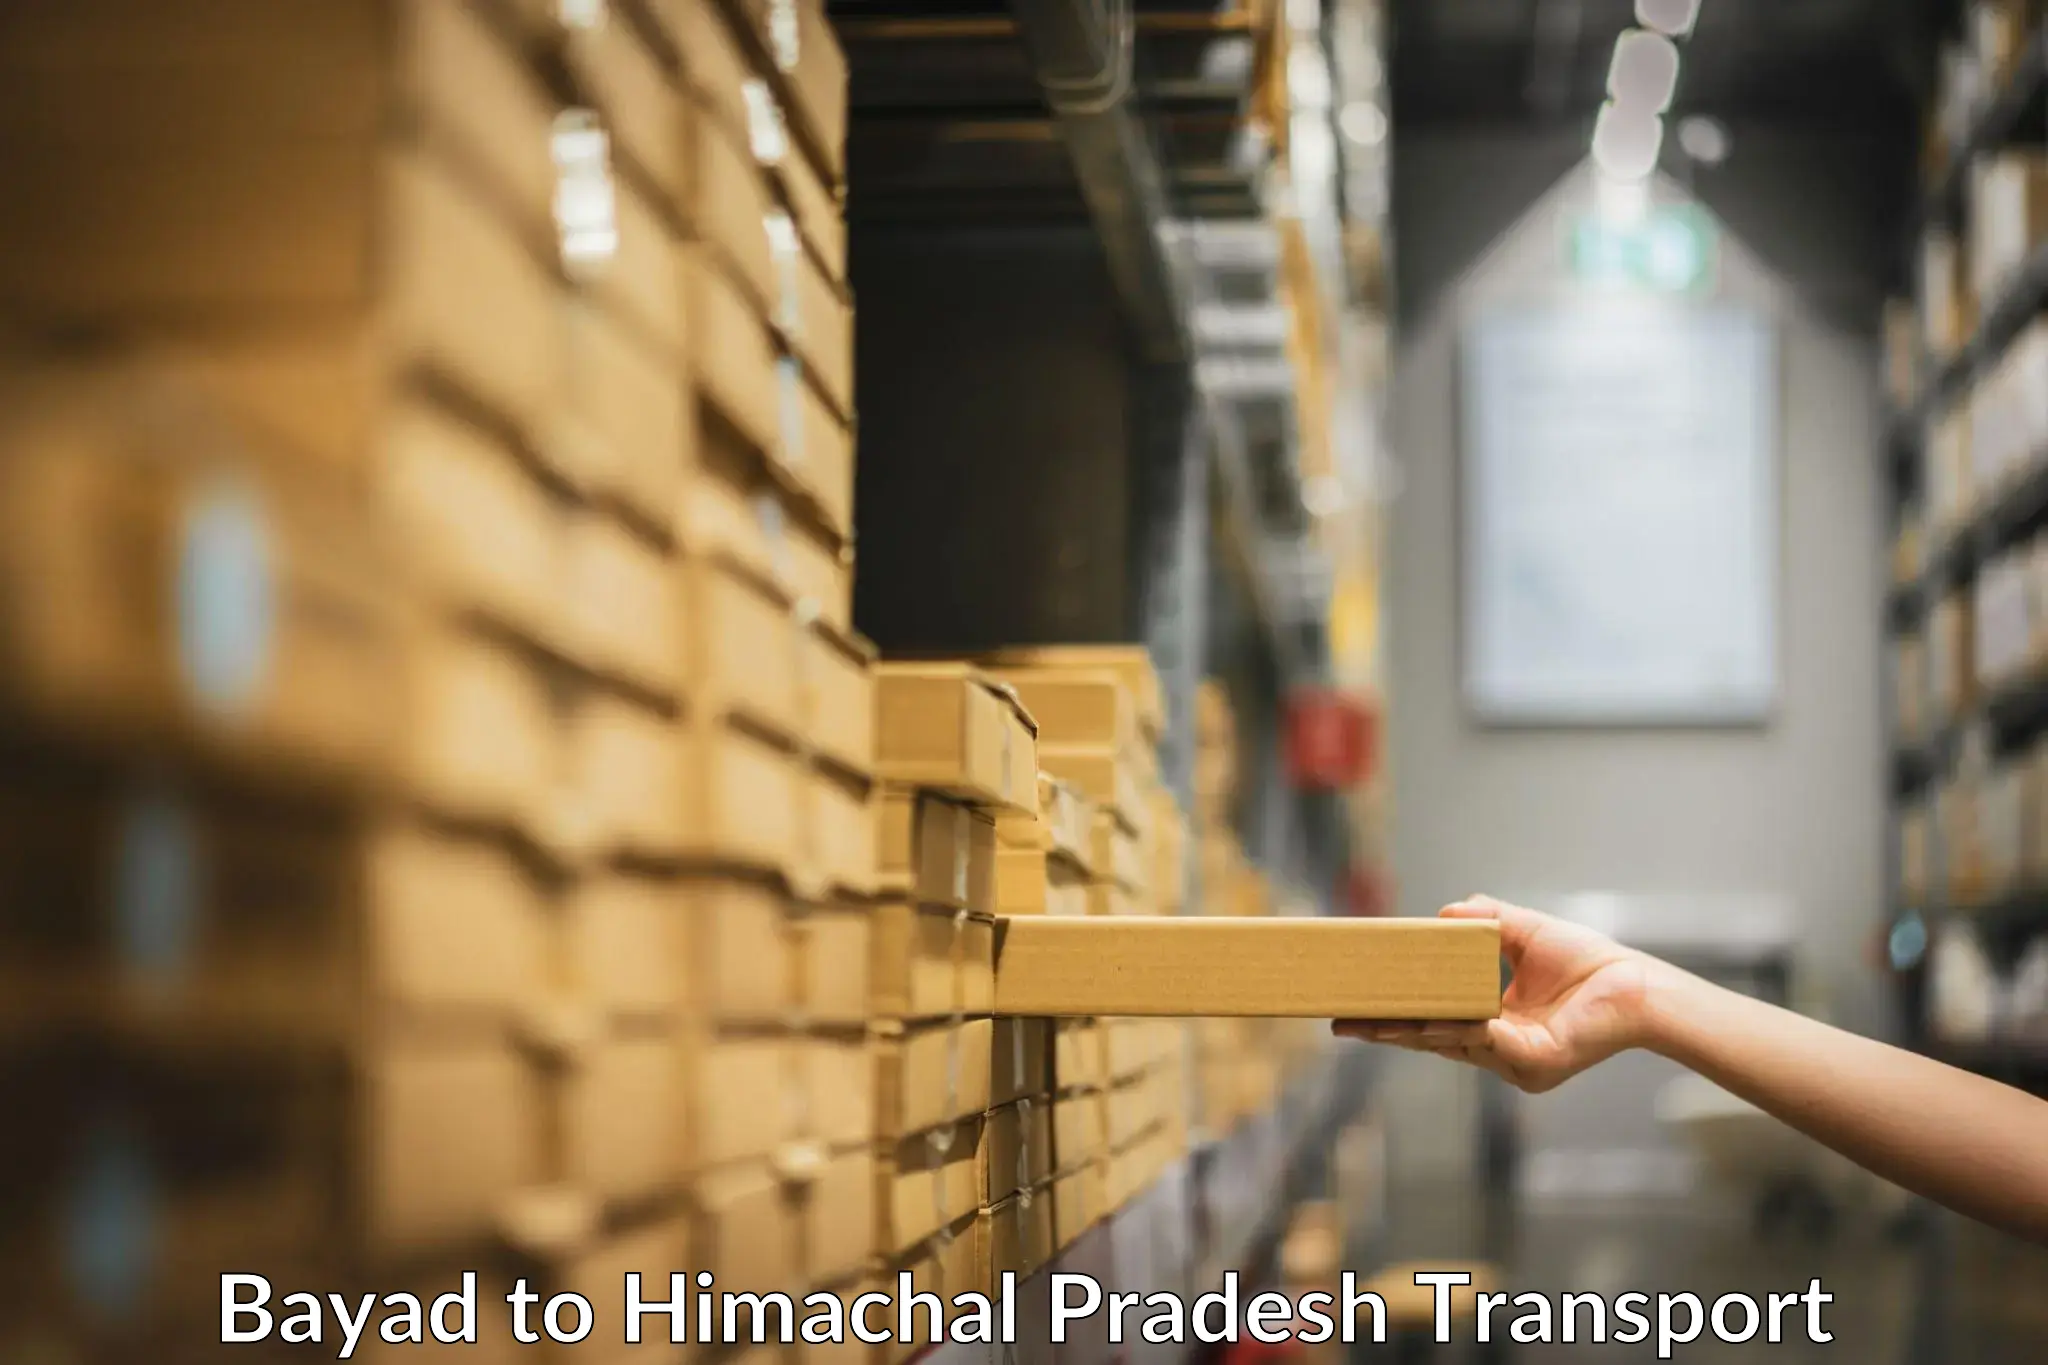 Shipping services in Bayad to Himachal Pradesh